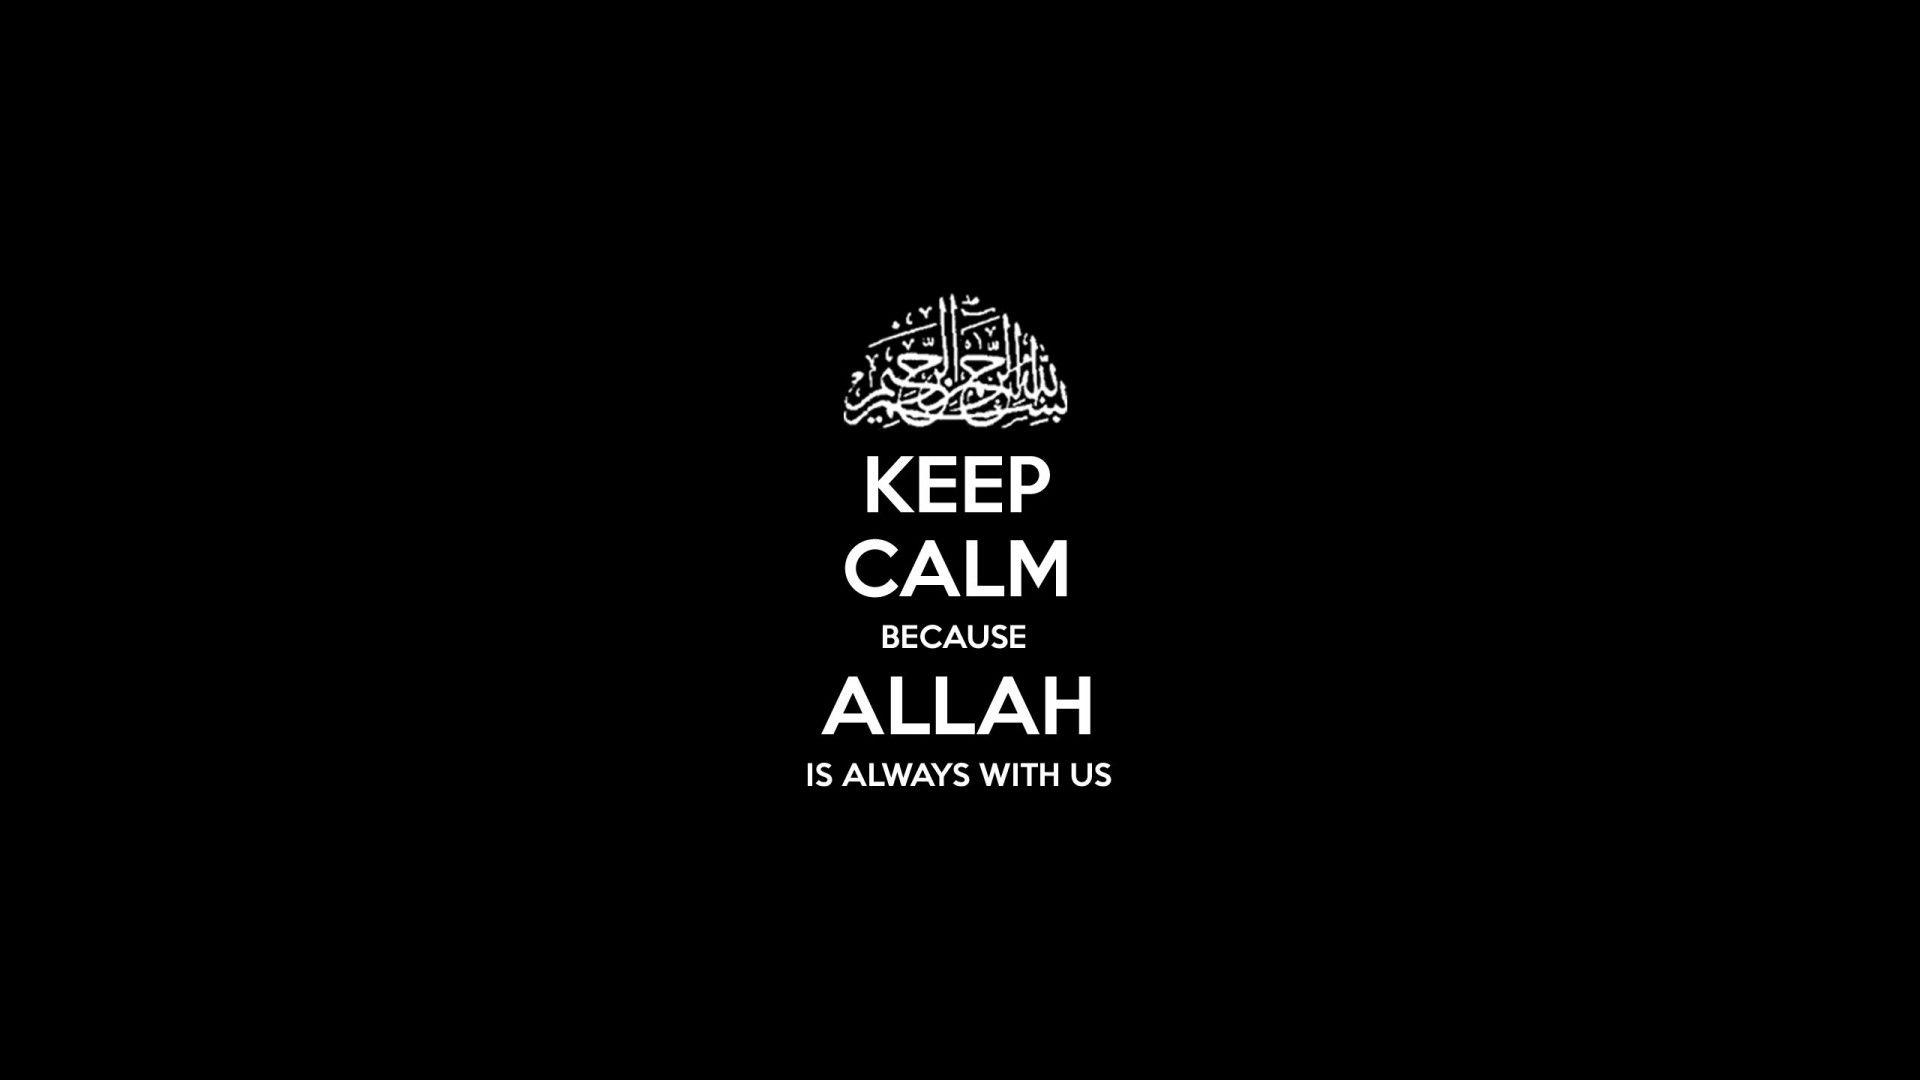 I Love Allah HD Wallpaper 1080p. HD quotes, Islamic quotes, Desktop background quote